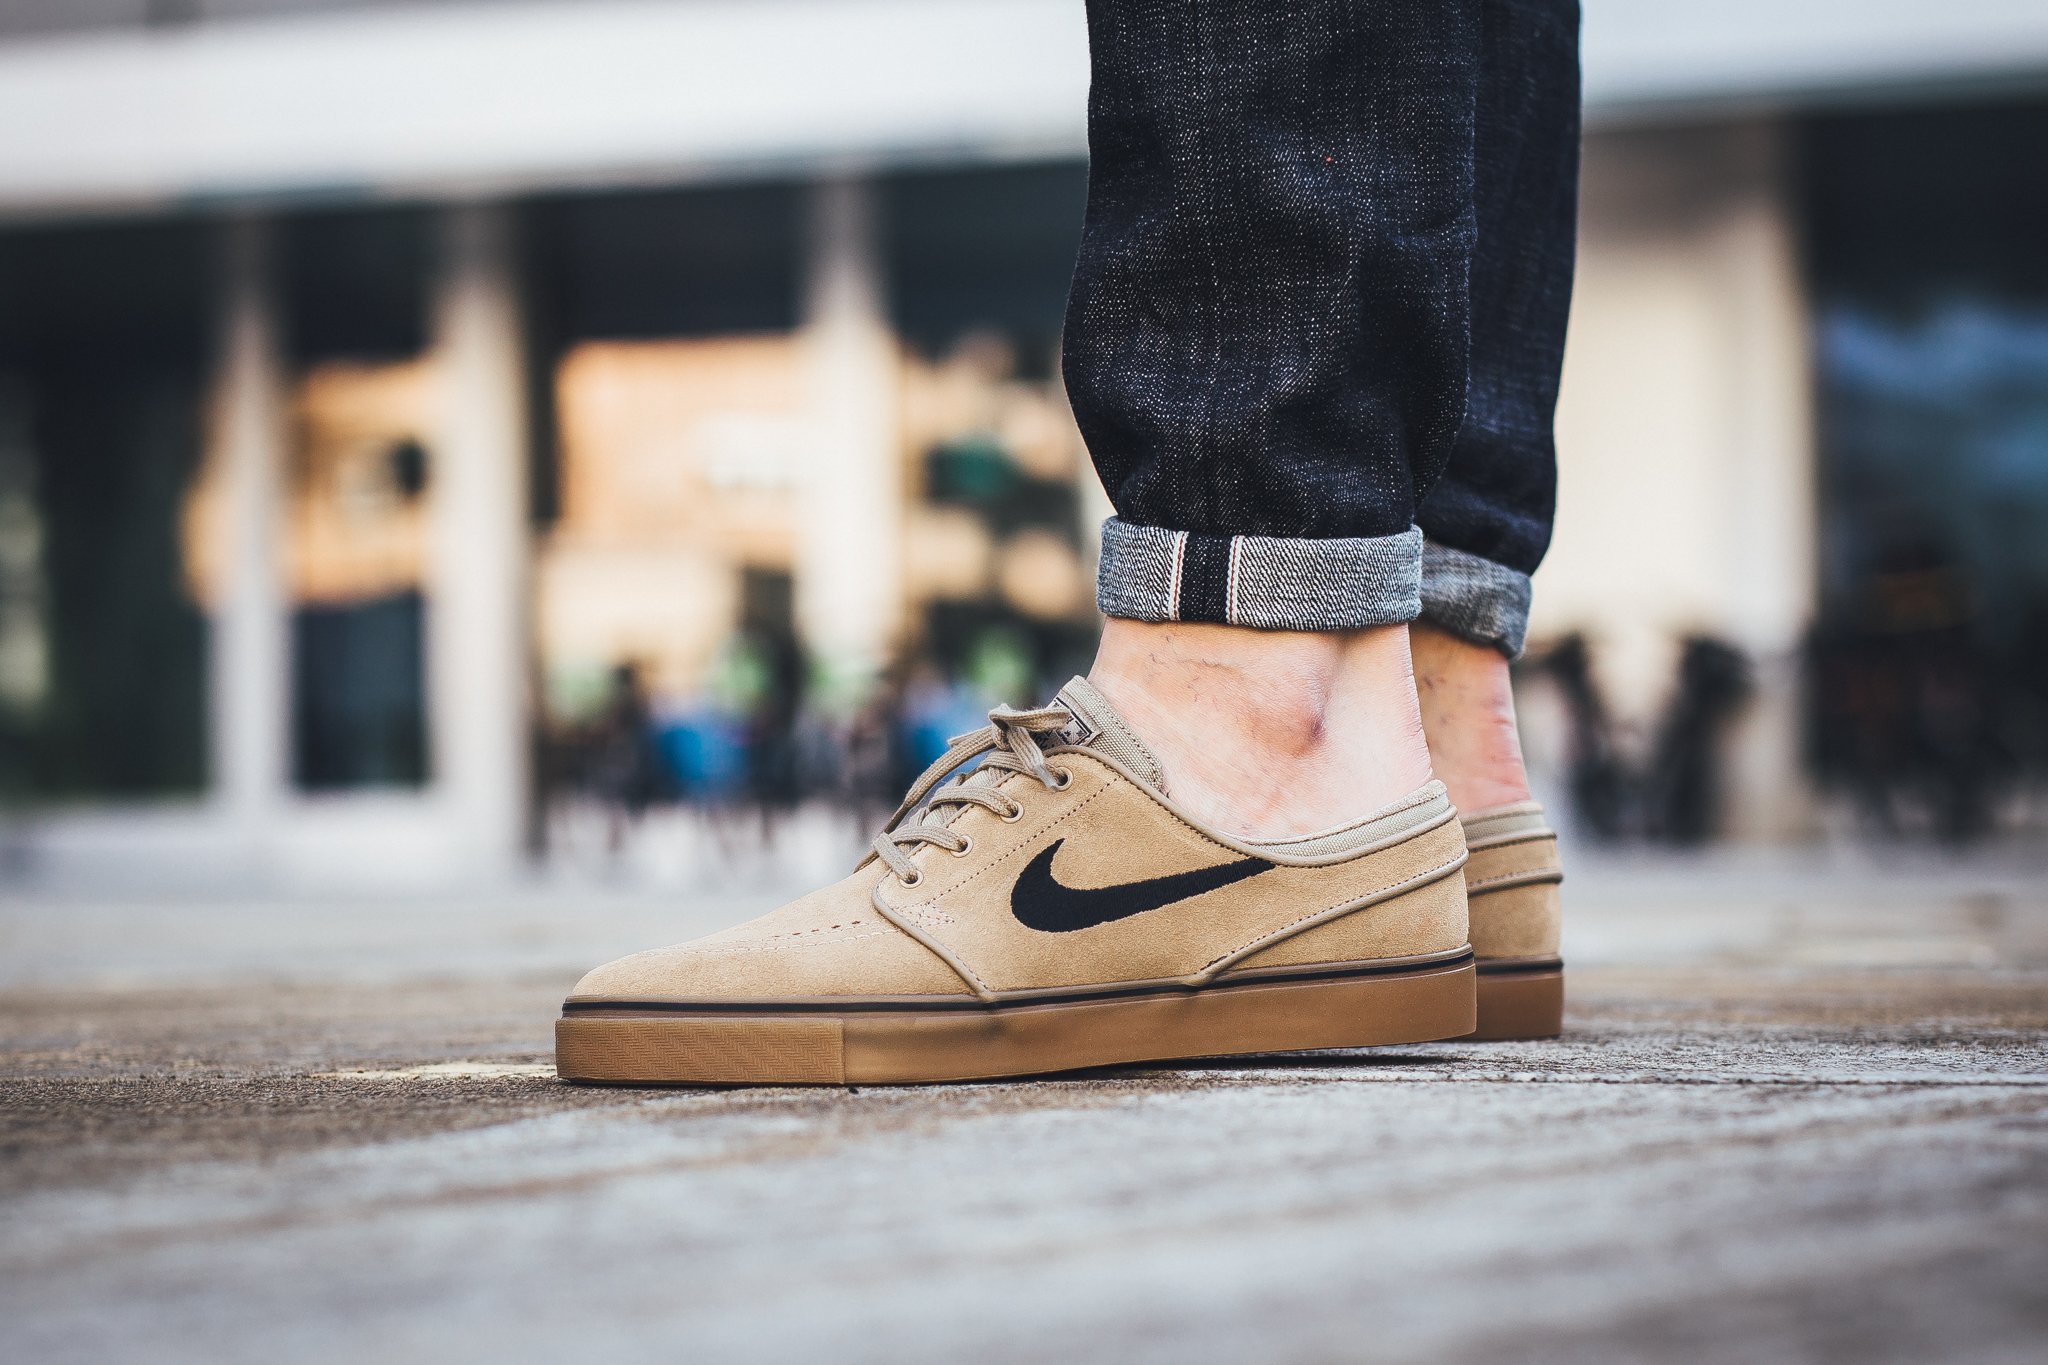 Titolo on Twitter: "Nike SB Zoom Stefan Janoski - Khaki/Black-Gum Light Brown Available now at SHOP HERE https://t.co/jYmBFY4Nmh" / Twitter